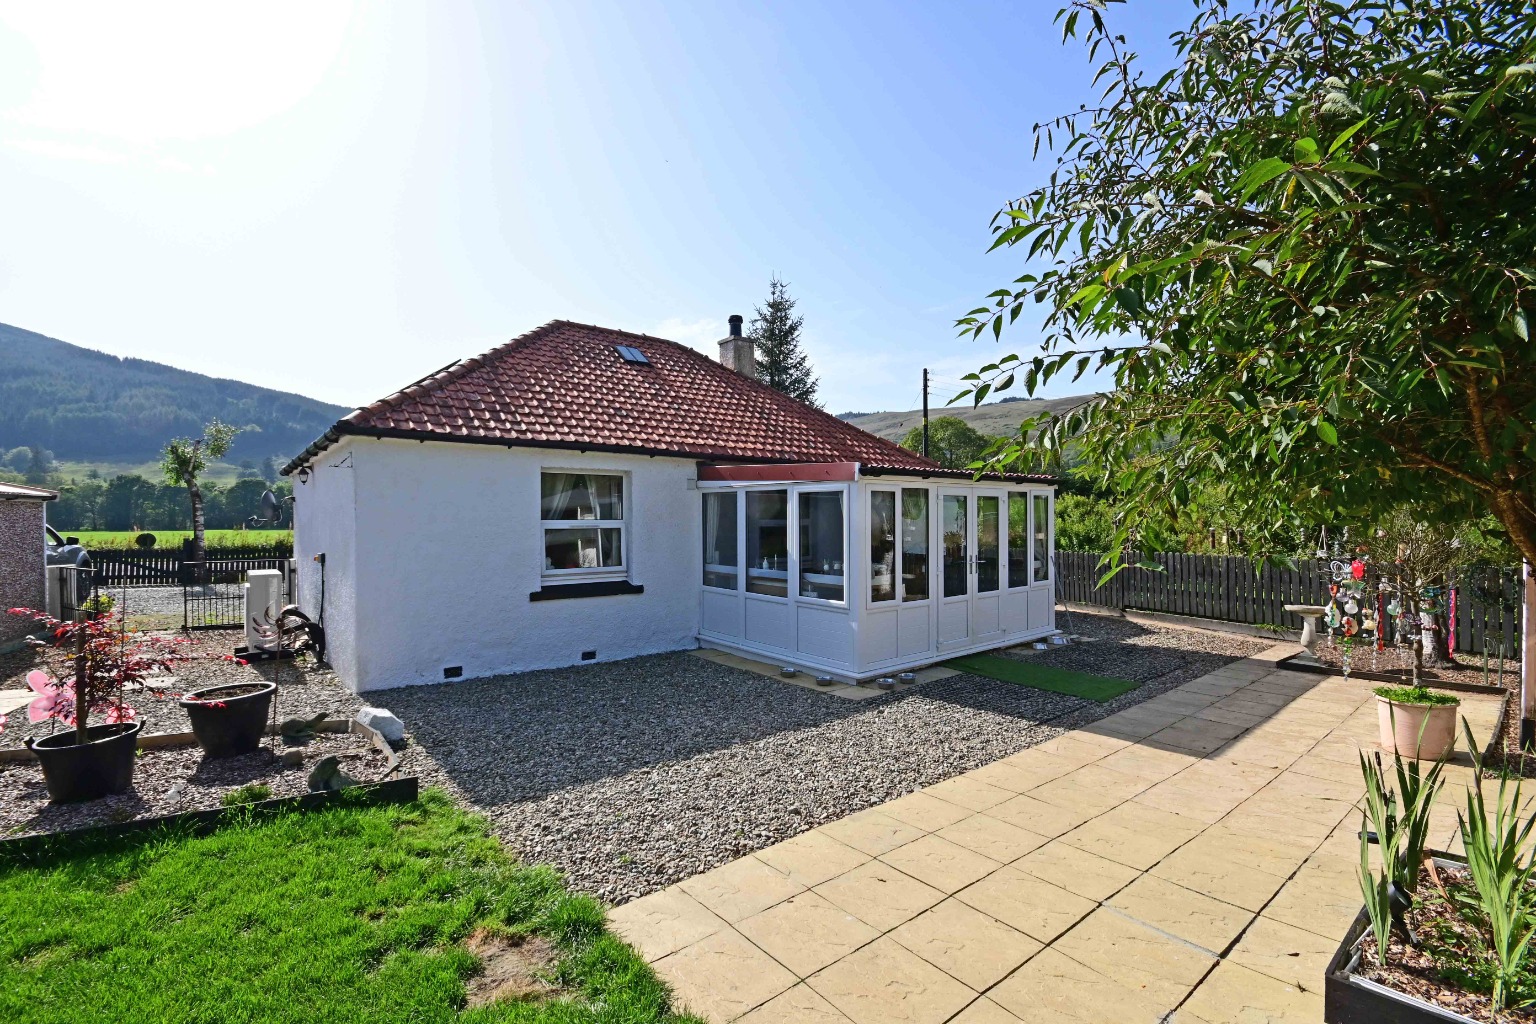 2 bed bungalow for sale, Cairndow - Property Image 1